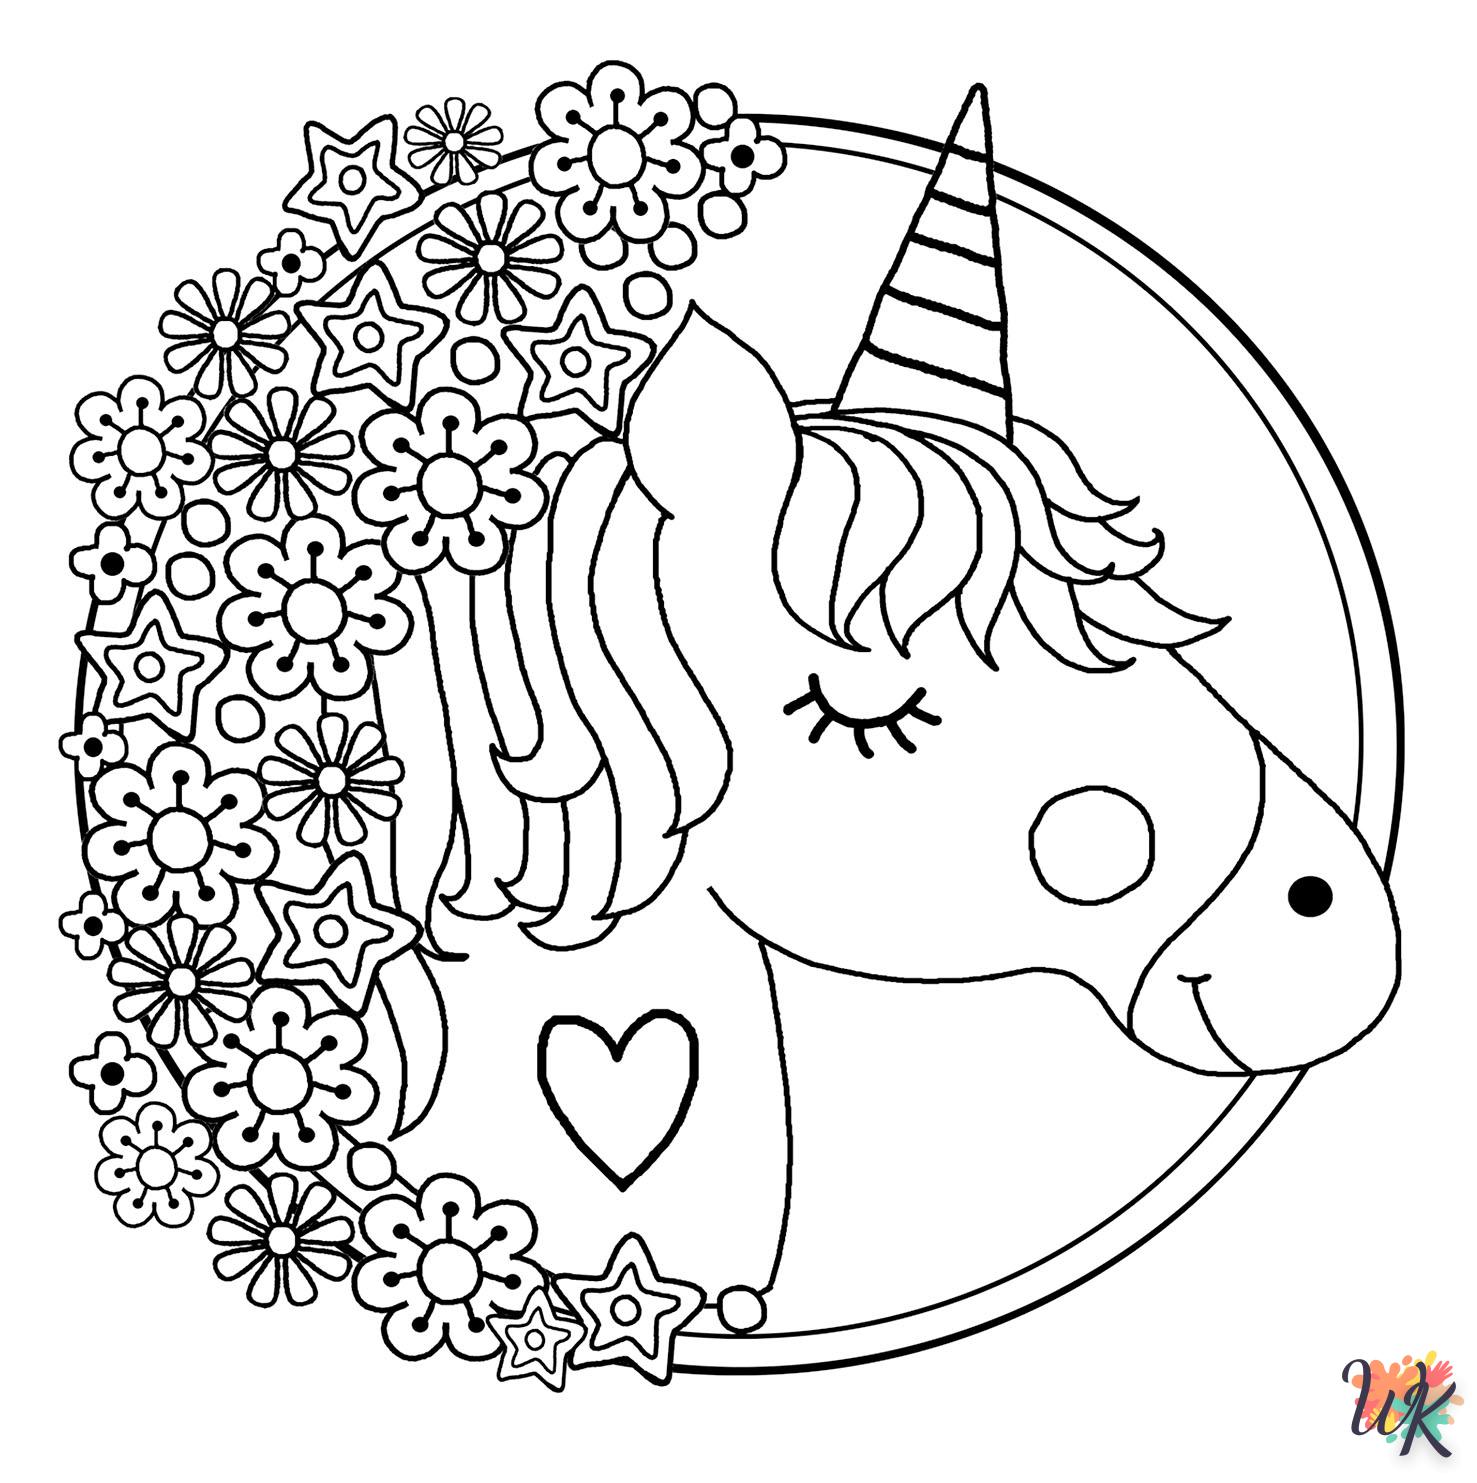 free full size printable Unicorn coloring pages for adults pdf